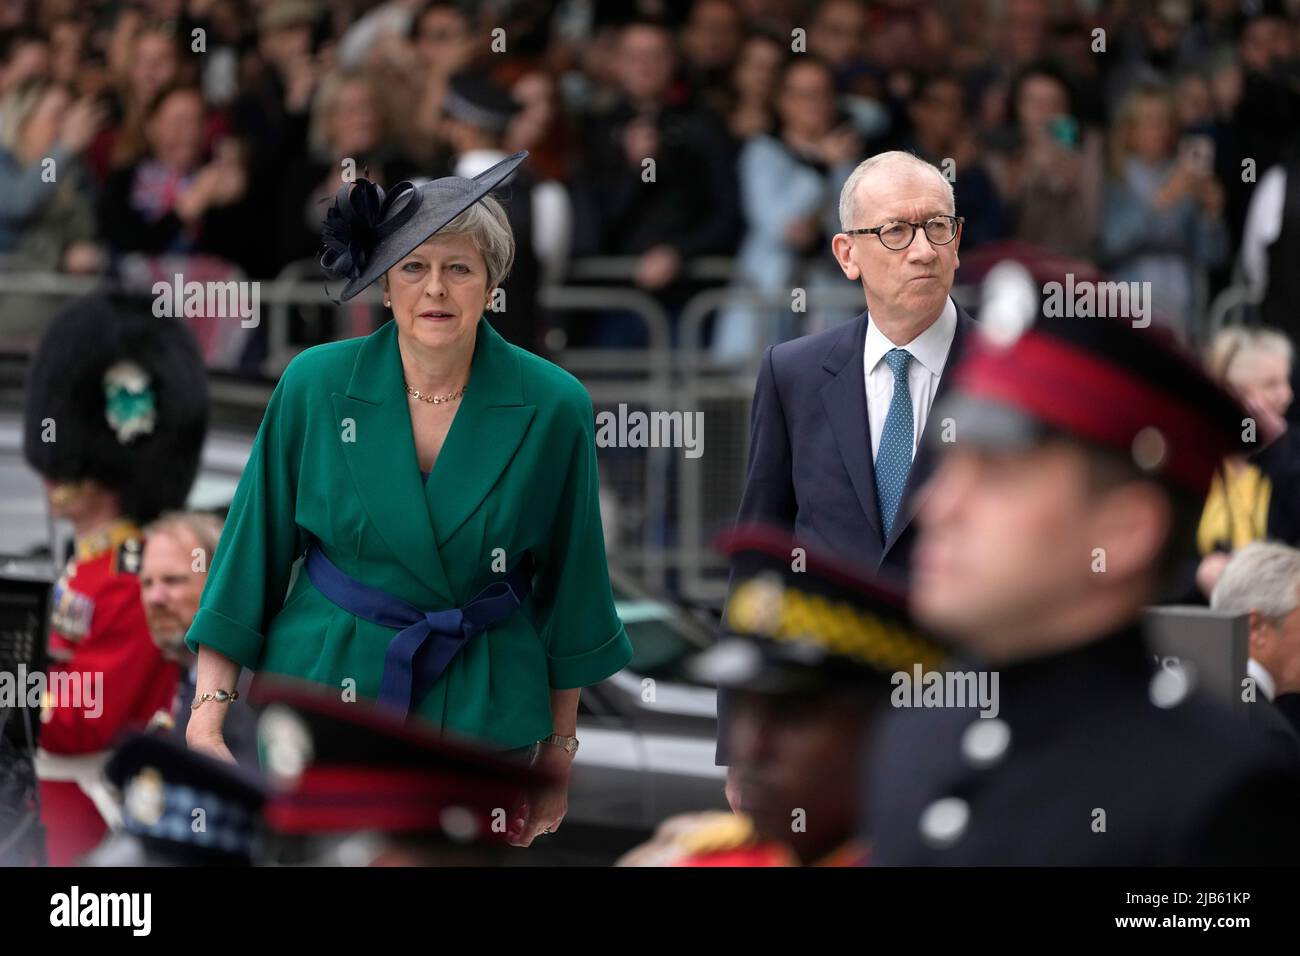 Former prime minister Theresa May and her husband Philip May arrive for the National Service of Thanksgiving at St Paul's Cathedral, London, on day two of the Platinum Jubilee celebrations for Queen Elizabeth II. Picture date: Friday June 3, 2022. Stock Photo